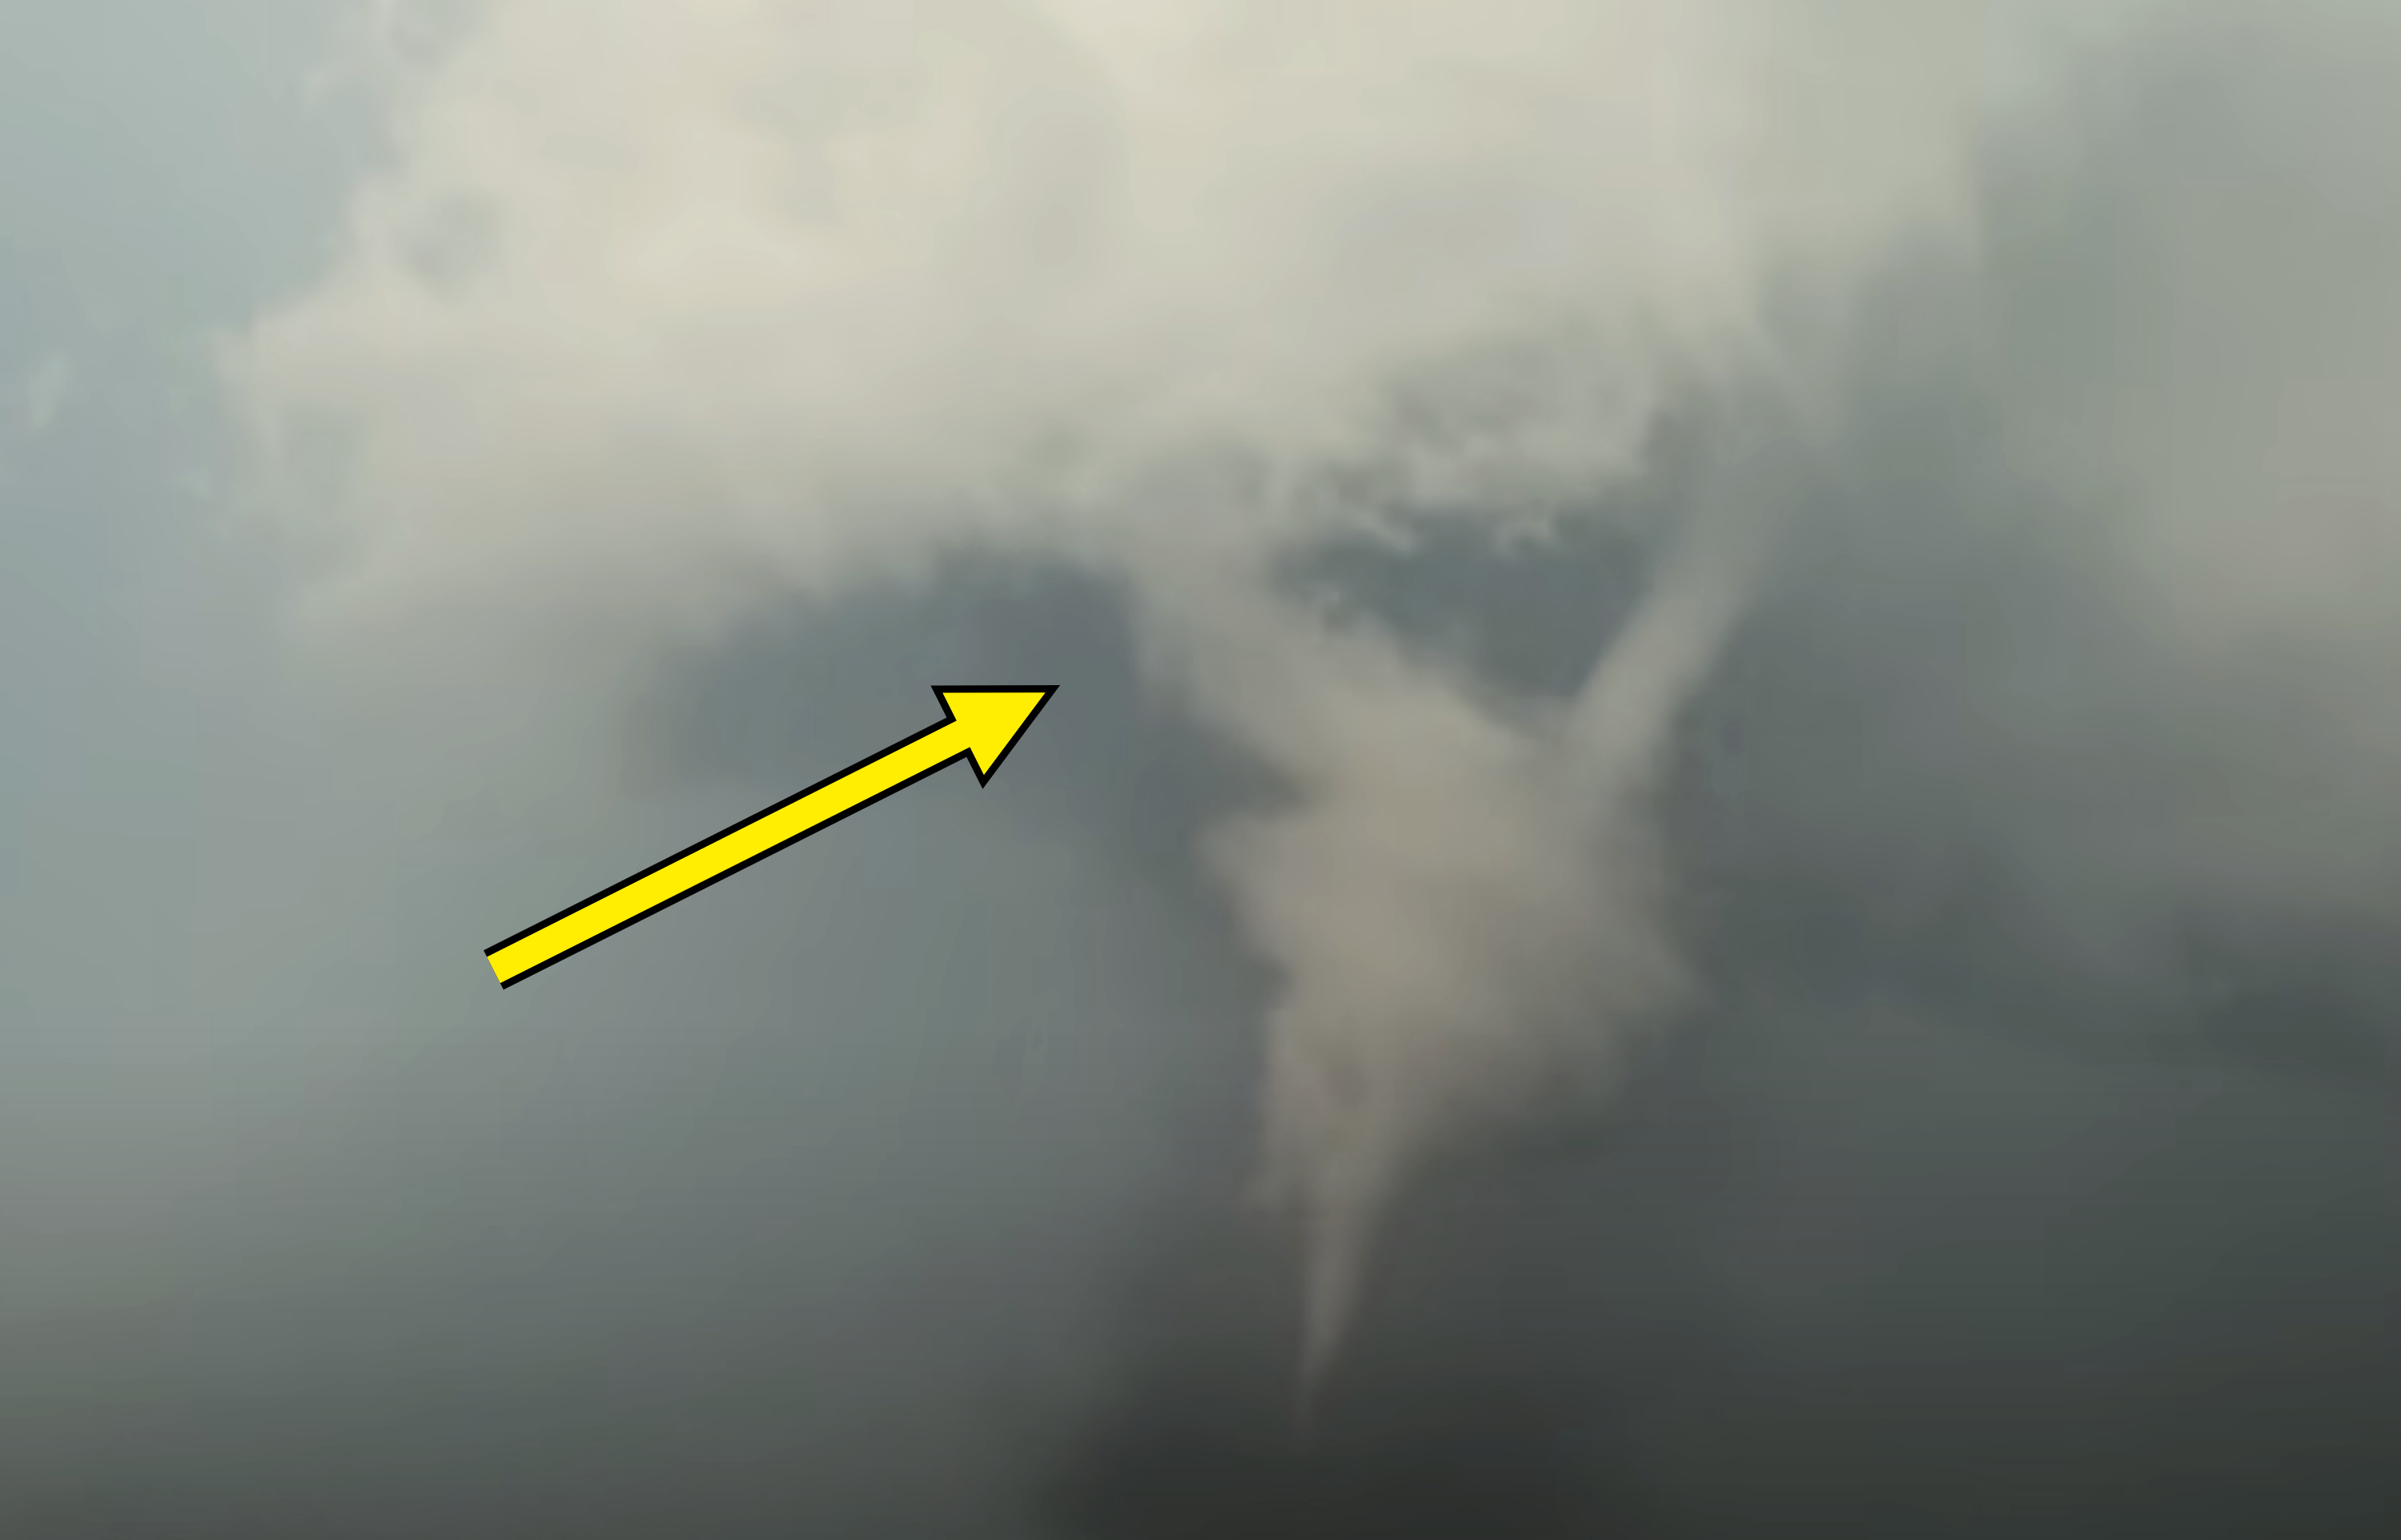 A tornado descends from a large, swirling mass of clouds in the sky, forming a funnel as it touches the ground